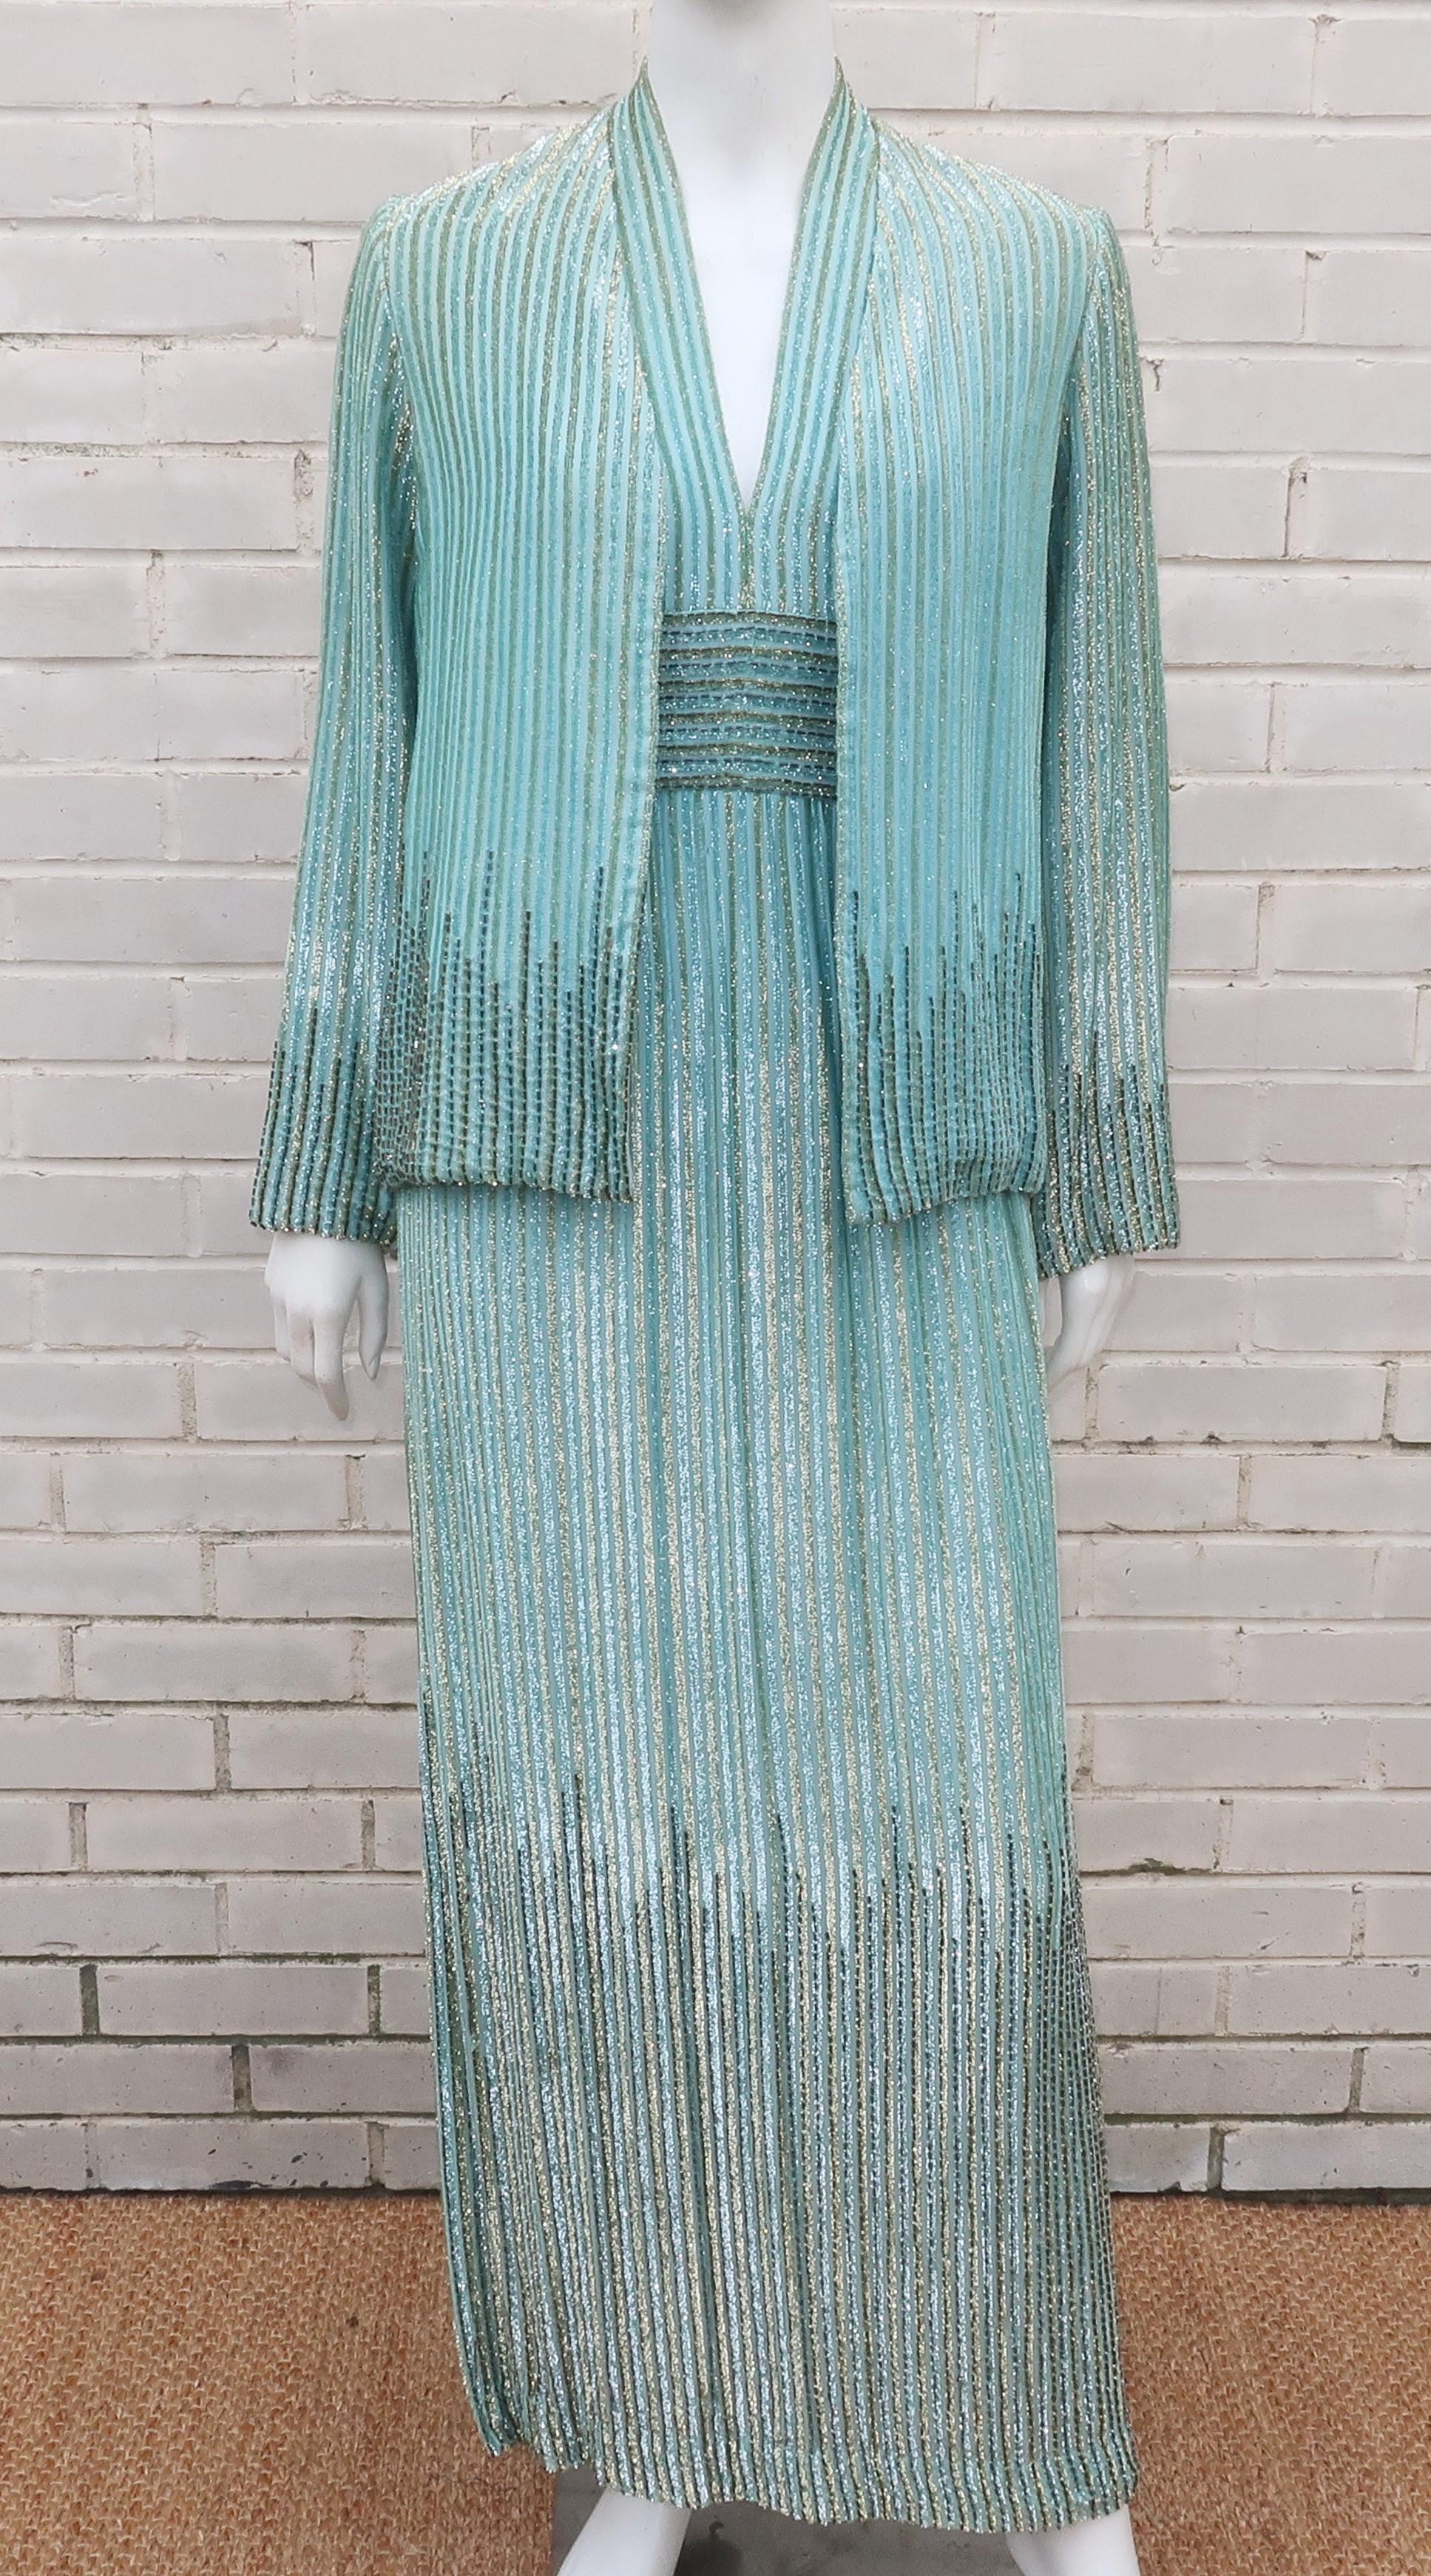 Va-va-voom! Ultra glamorous 1970's two piece halter dress and jacket by New York couturier, Alfred Bosand.  The two pieces are designed with a unique mint green fabric that has a velvety gold lamé stripe akin to a flocked fabric with gold bugle